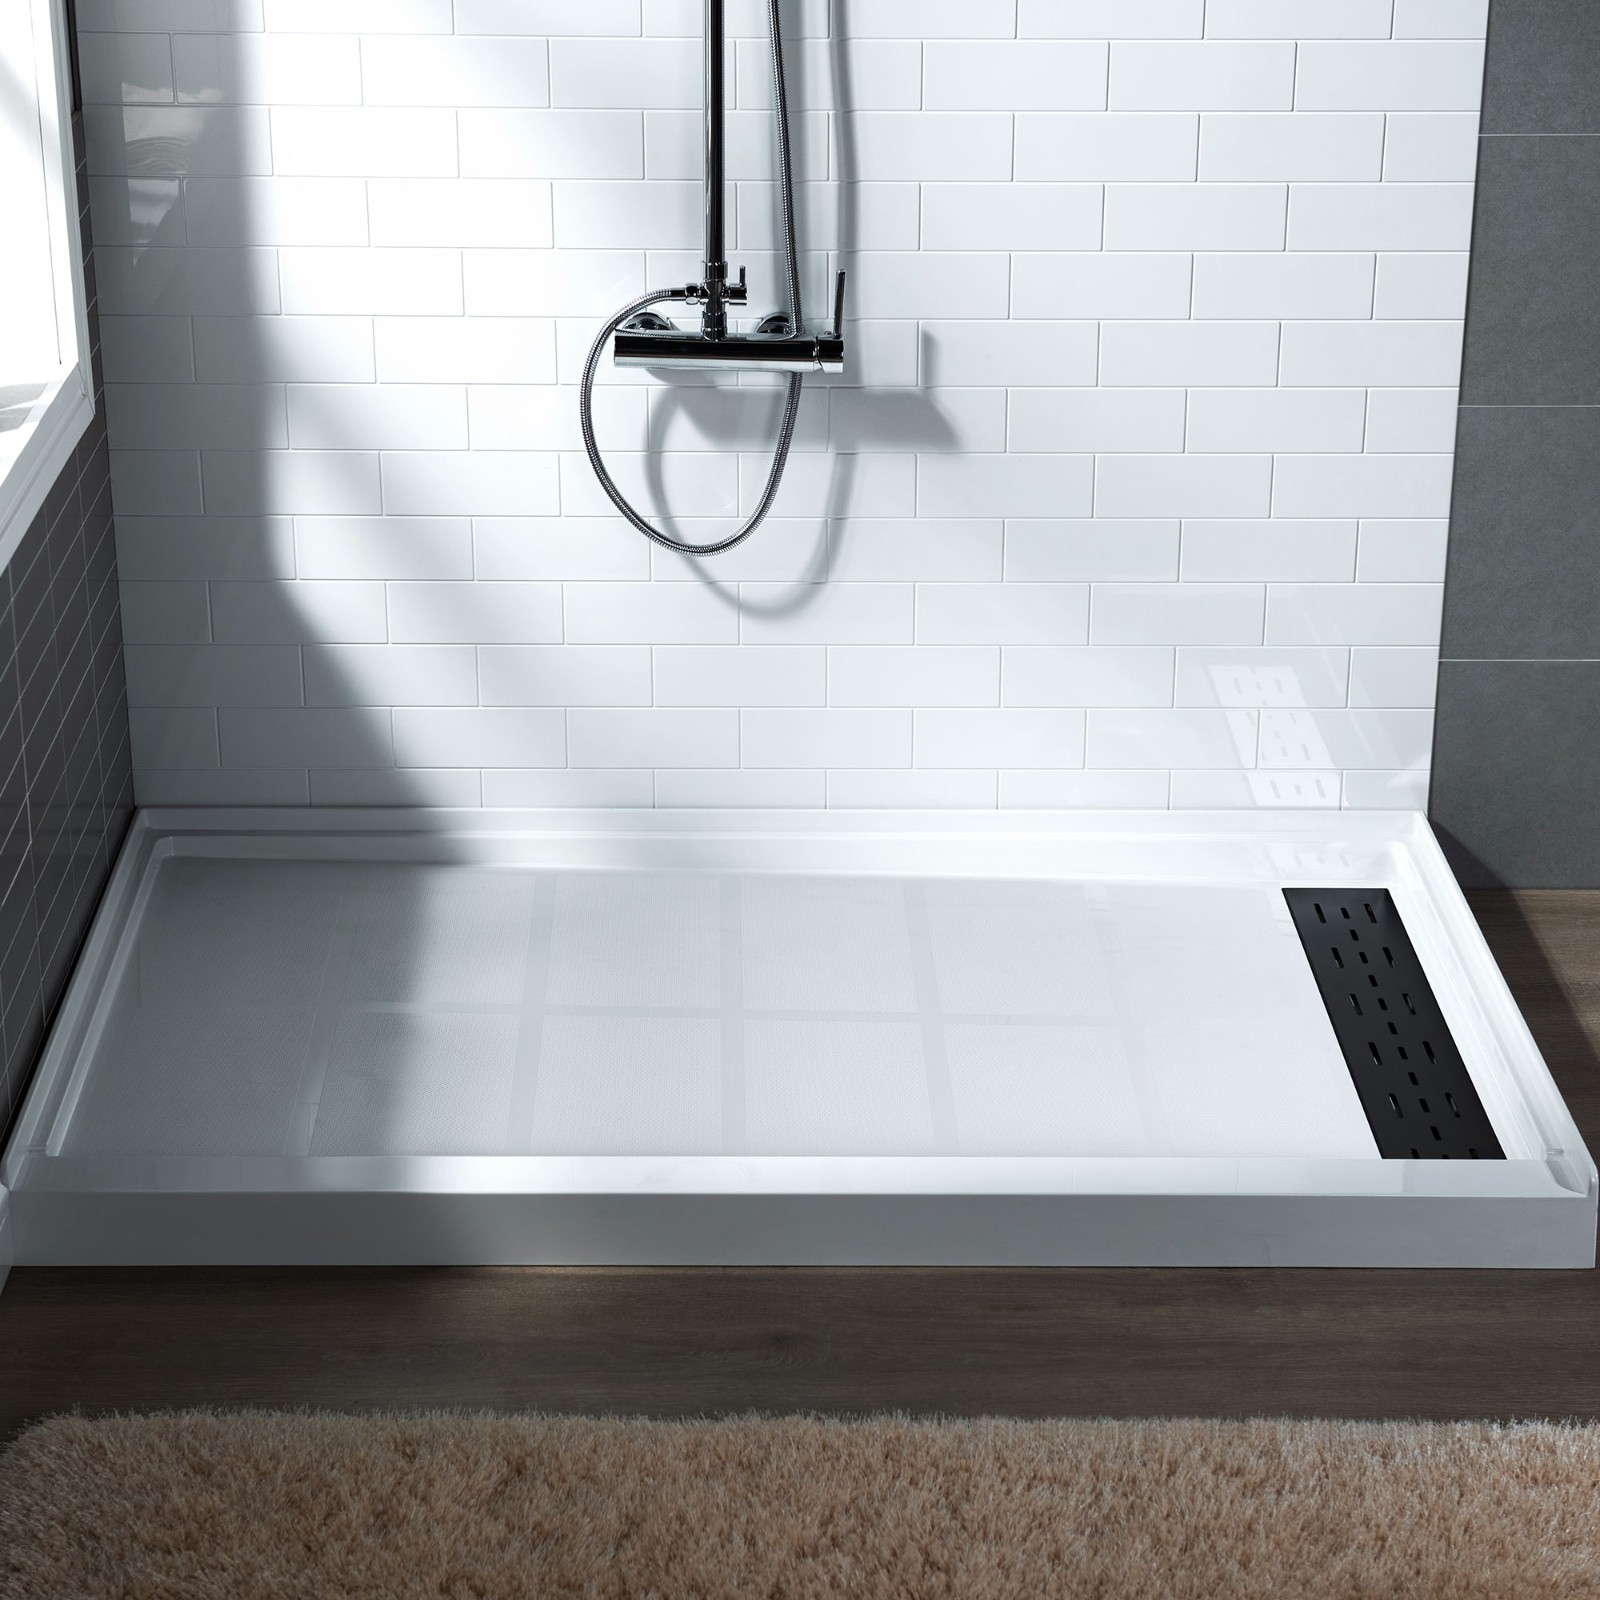  WOODBRIDGE SBR6032-1000R-MB SolidSurface Shower Base with Recessed Trench Side Including Matte Black Linear Cover, 60